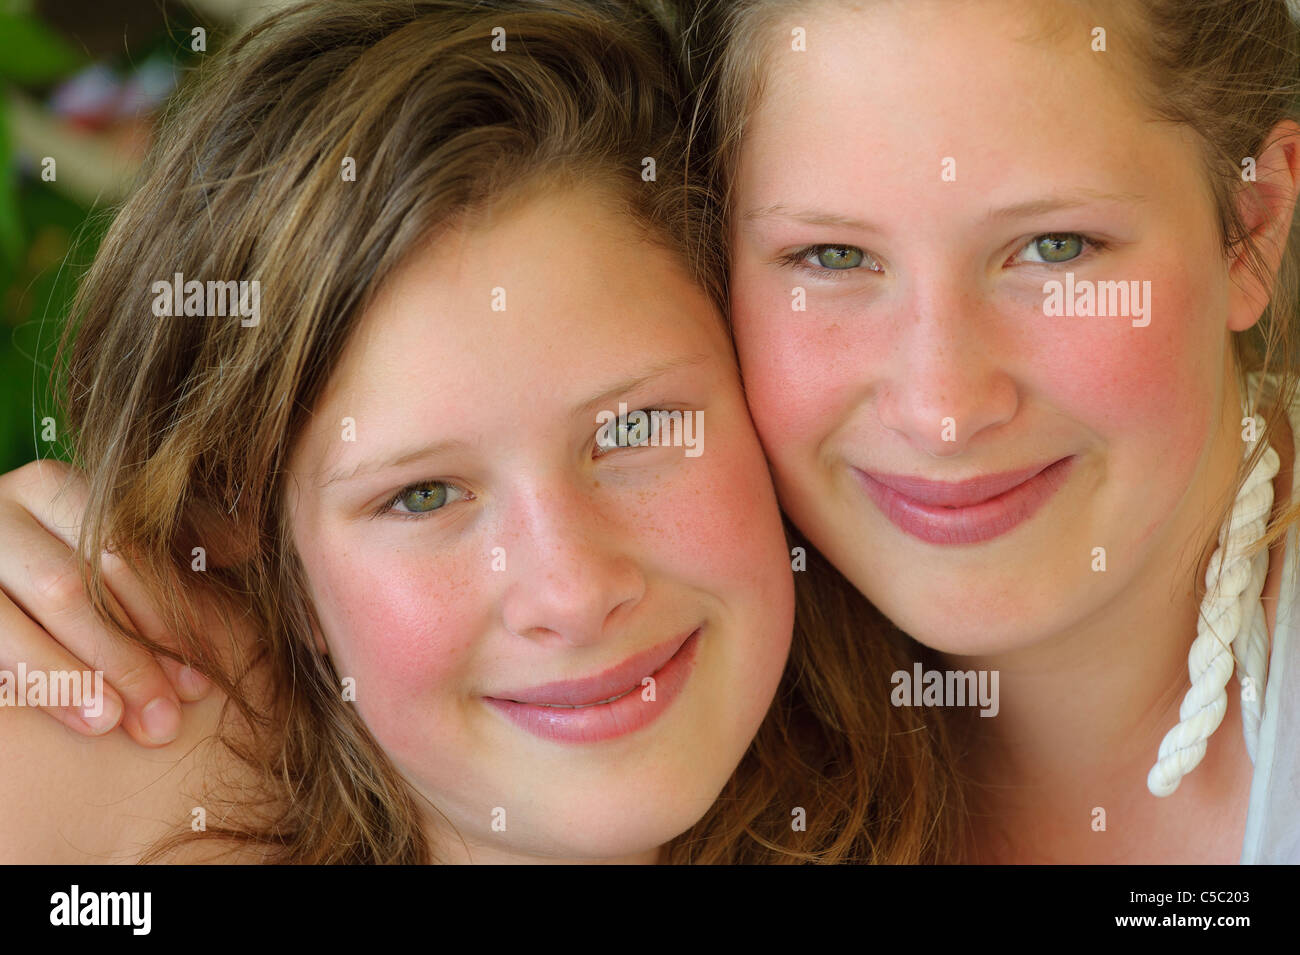 Close-up portrait of two twin sisters with arm around shoulder smiling Stock Photo